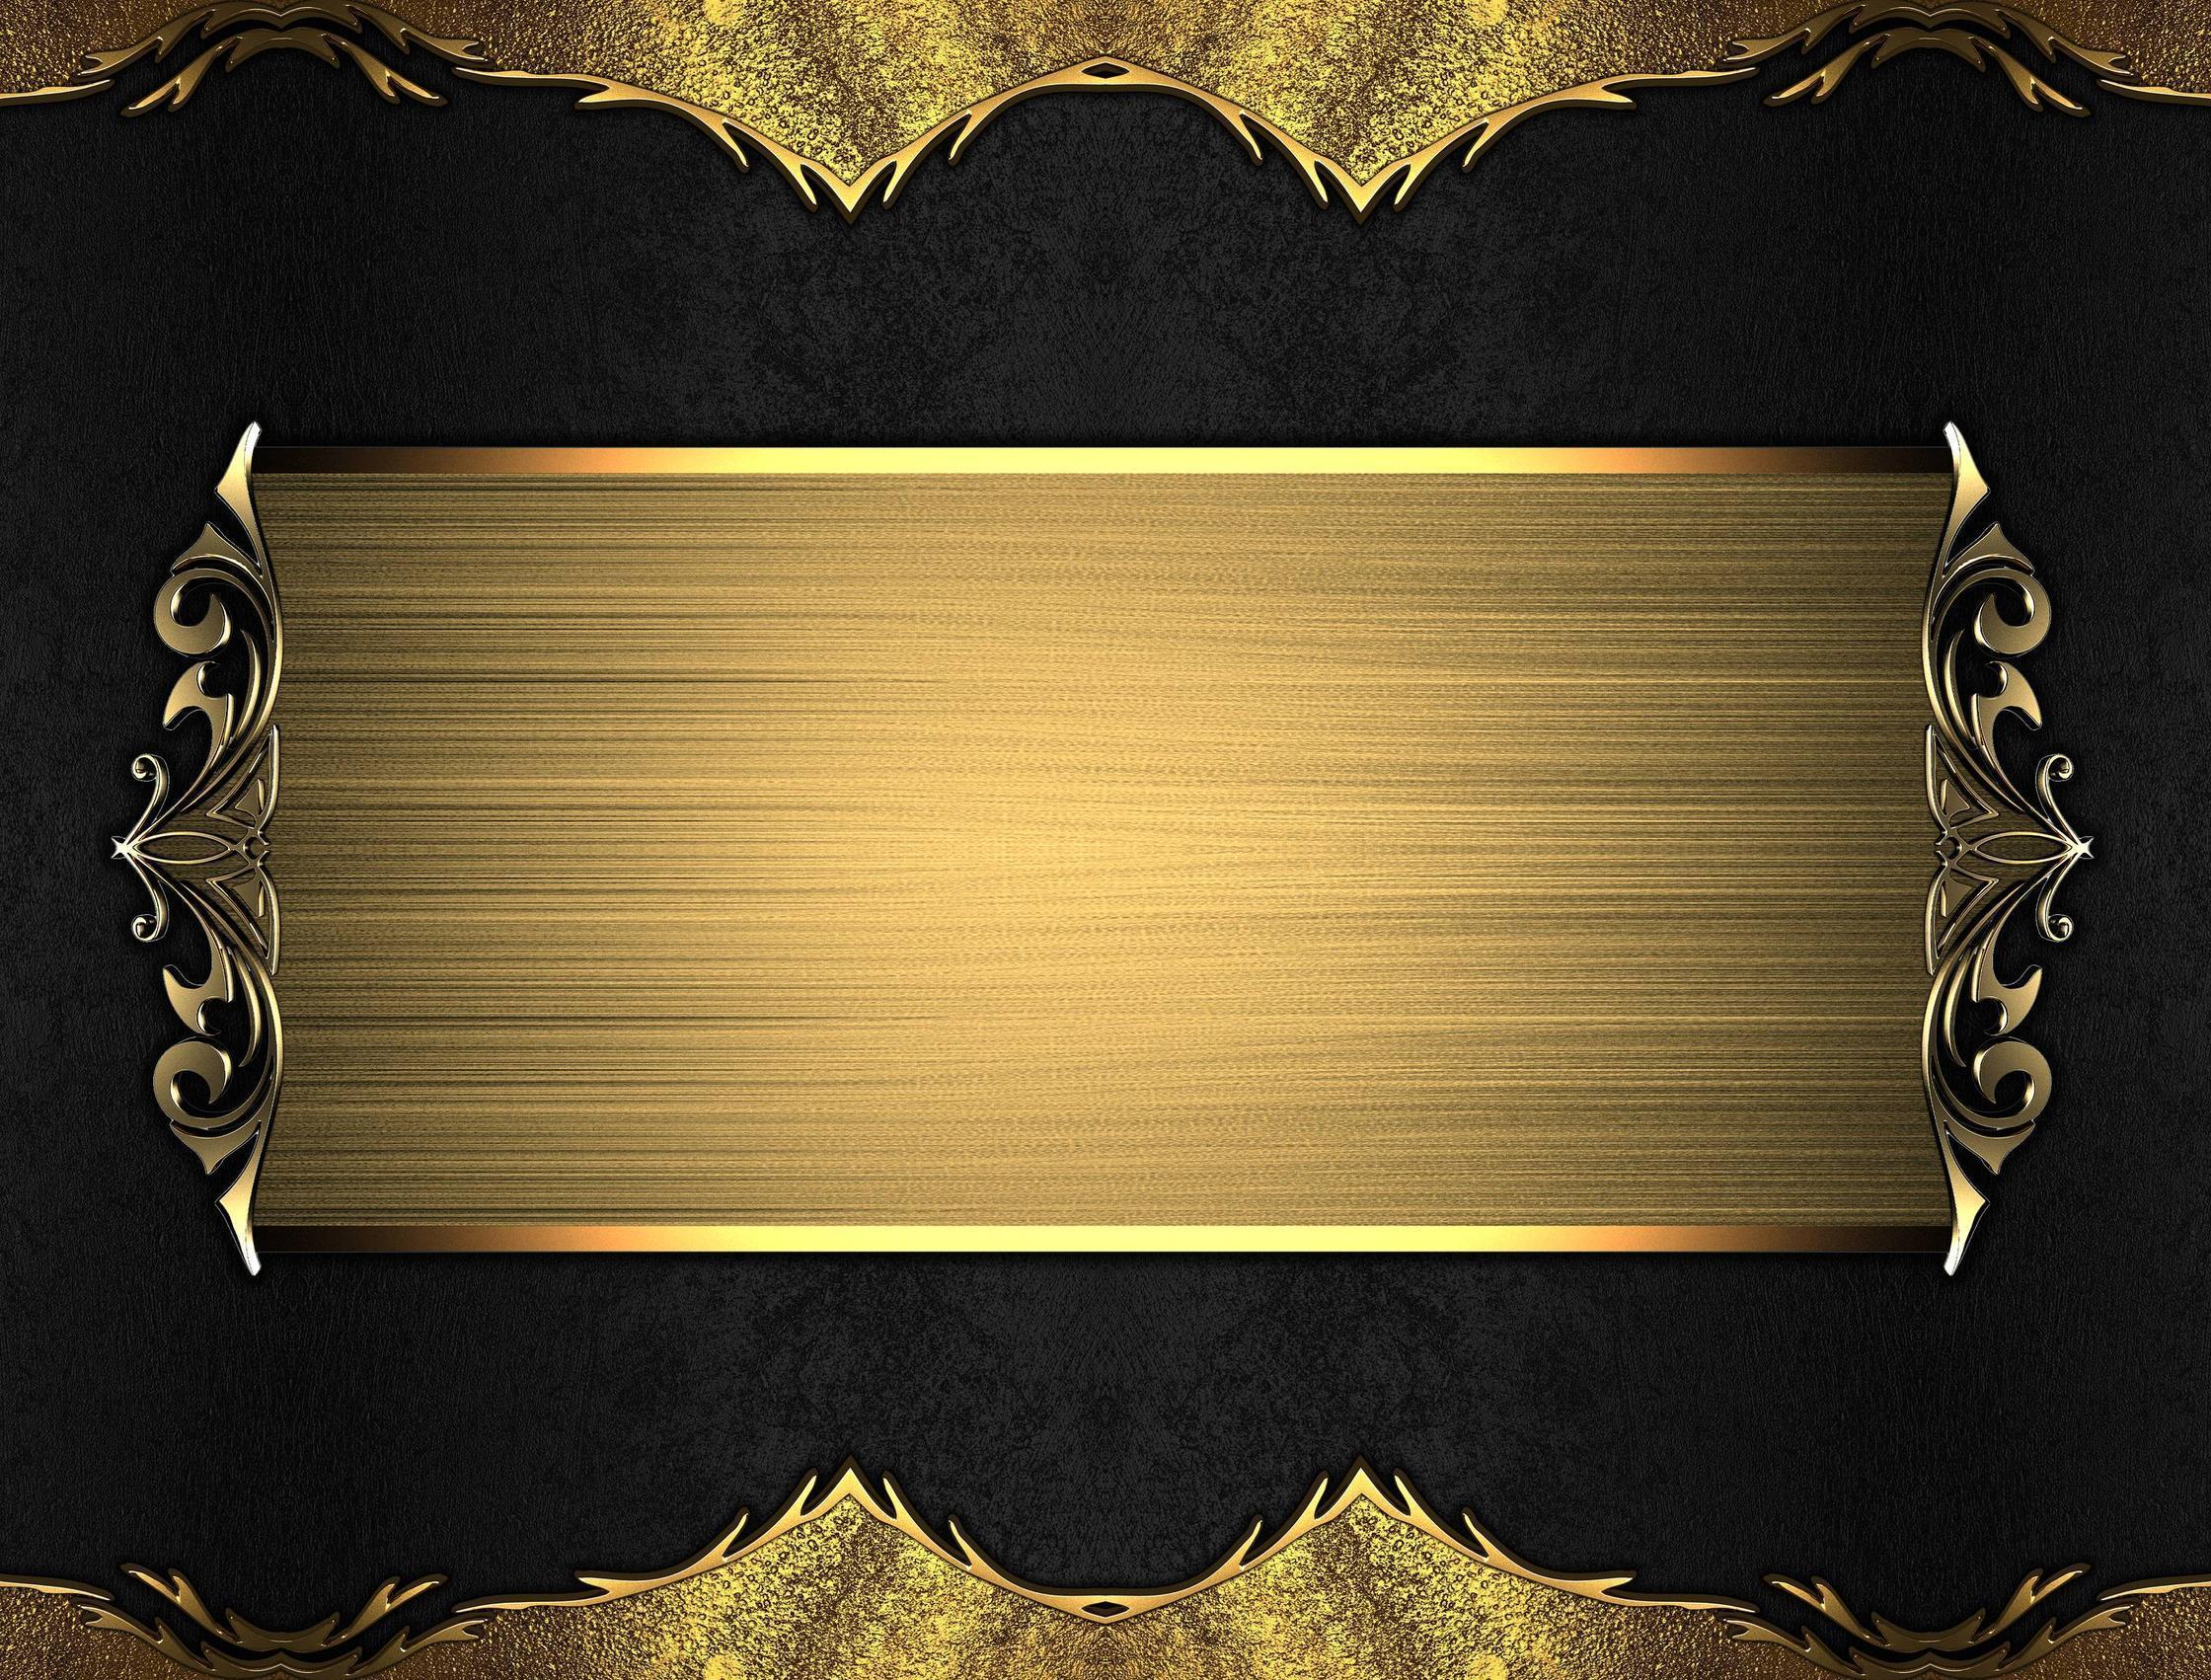 Black And Gold Backgrounds Related Keywords amp Suggestions